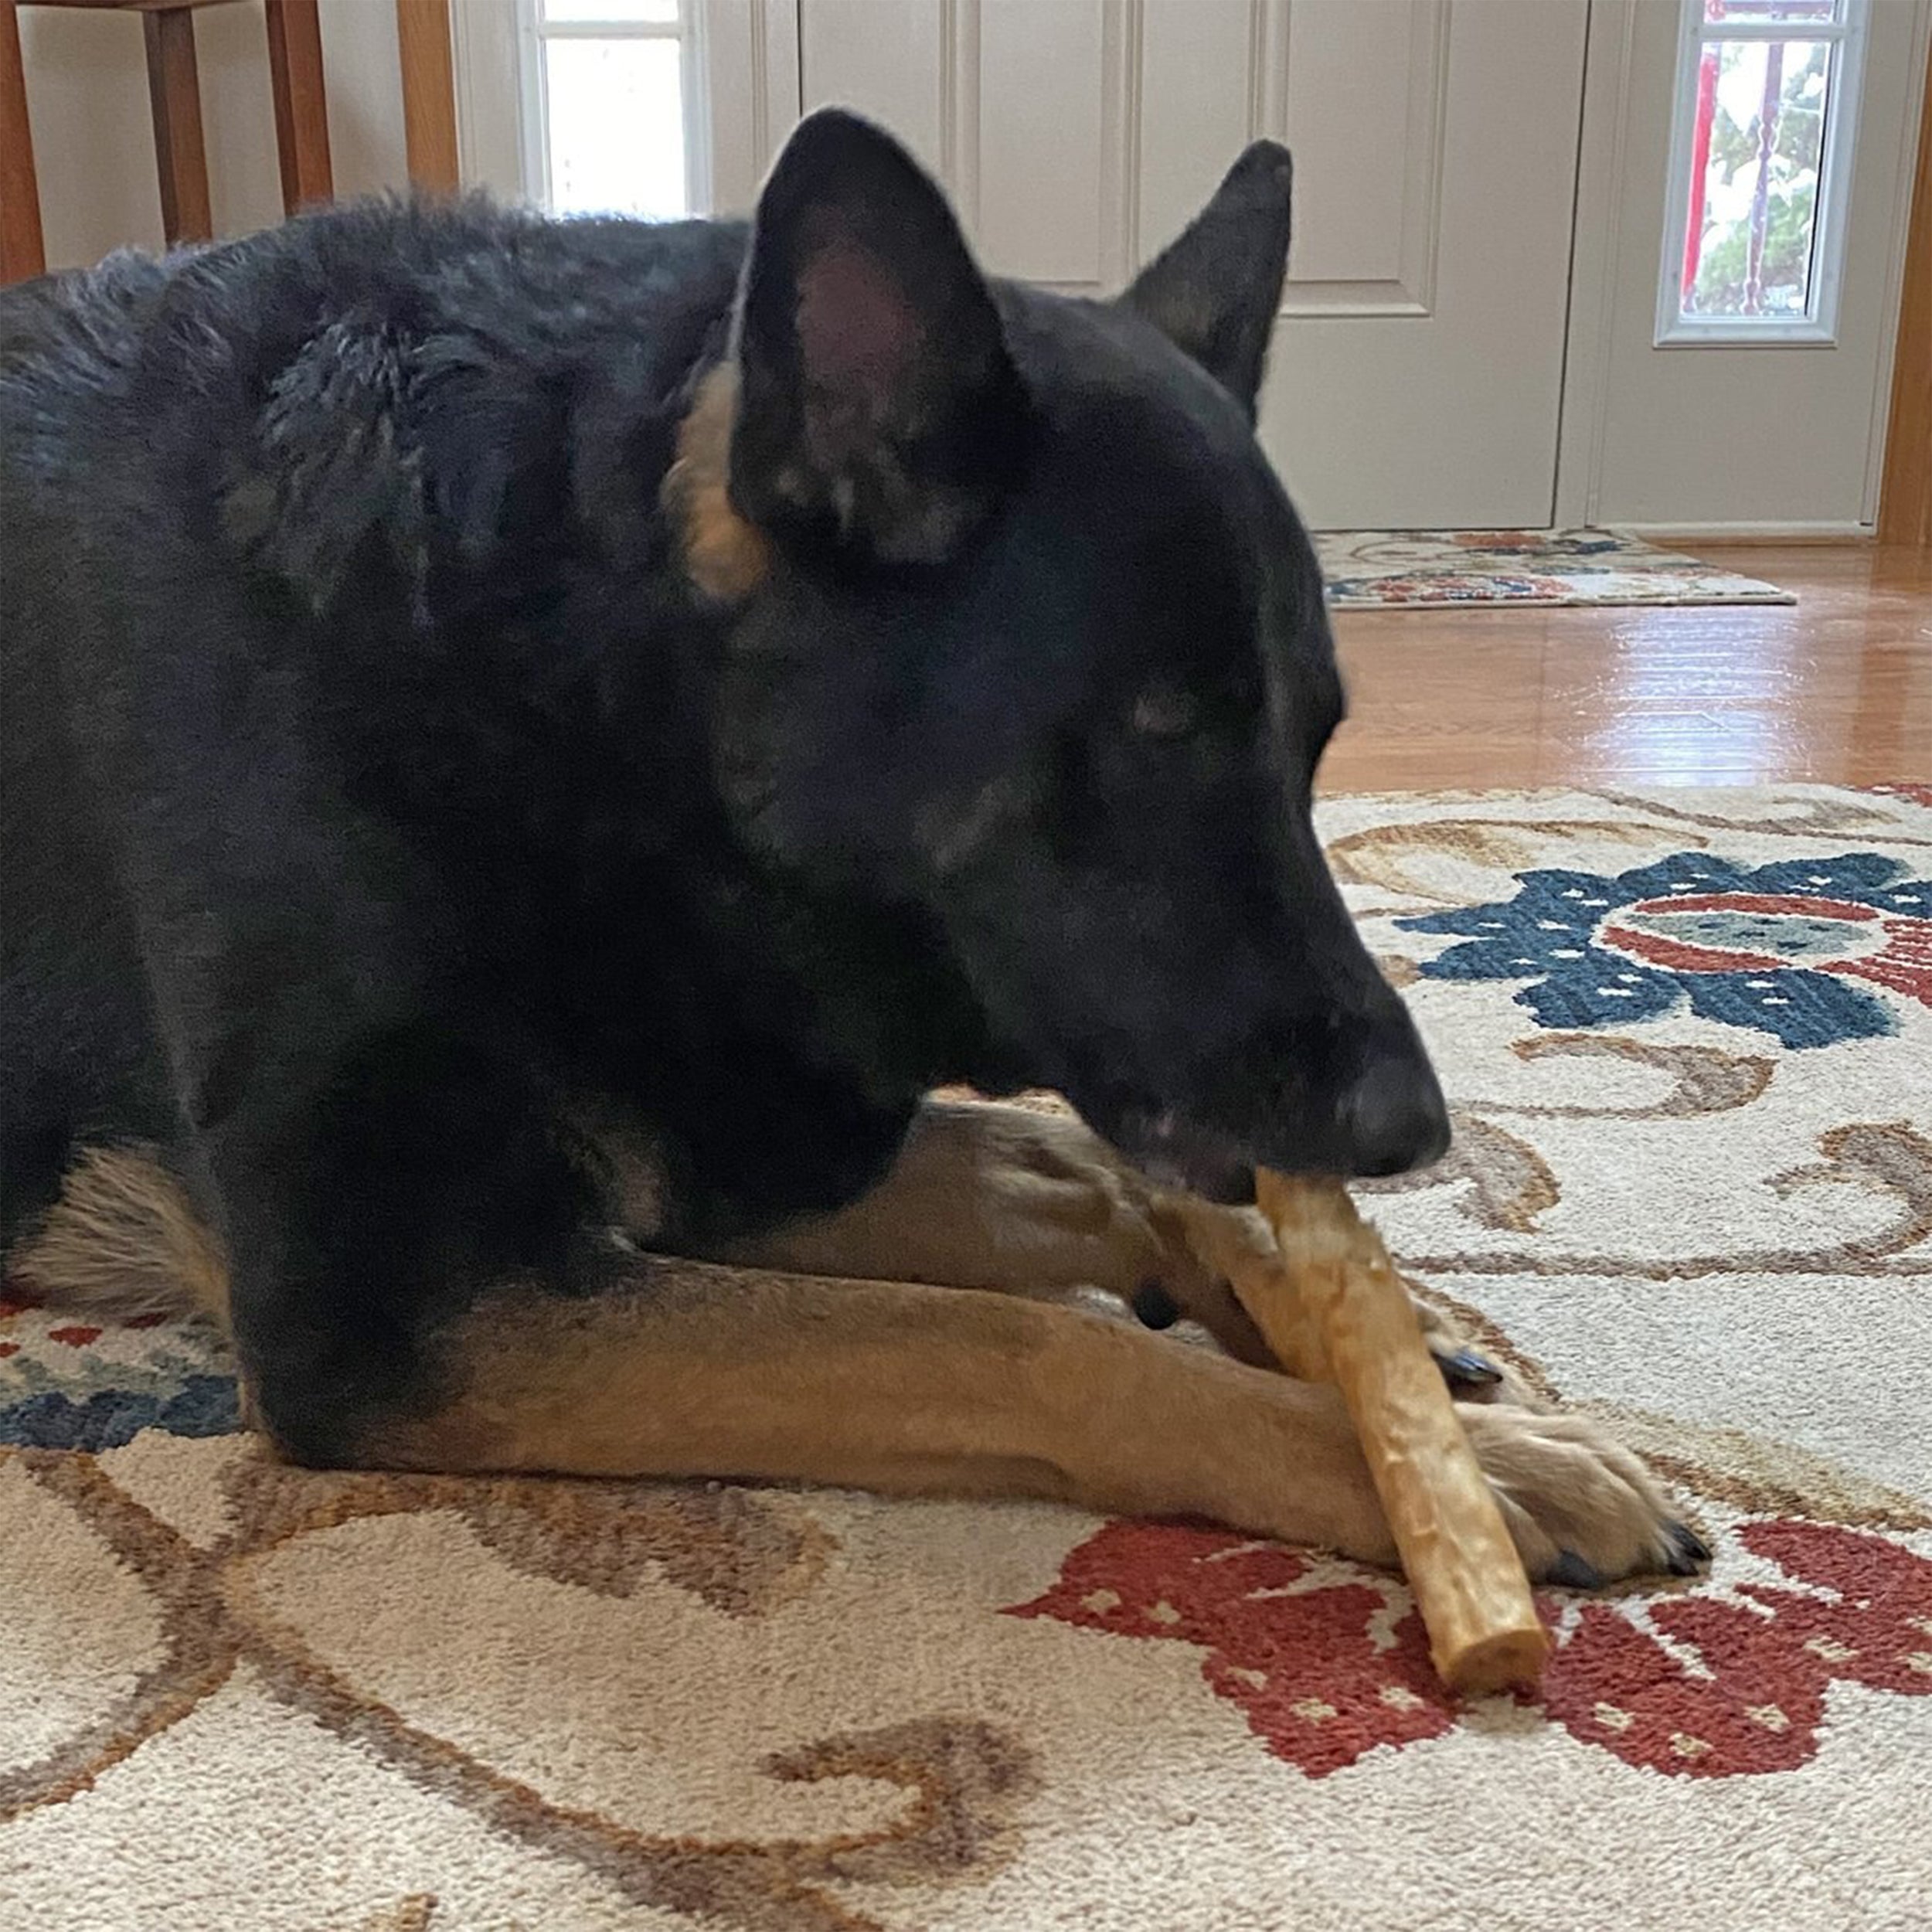 Fieldcrest Farms Nothin' To Hide Rawhide Alternative Large Roll 10" Natural Chew Dog Treats